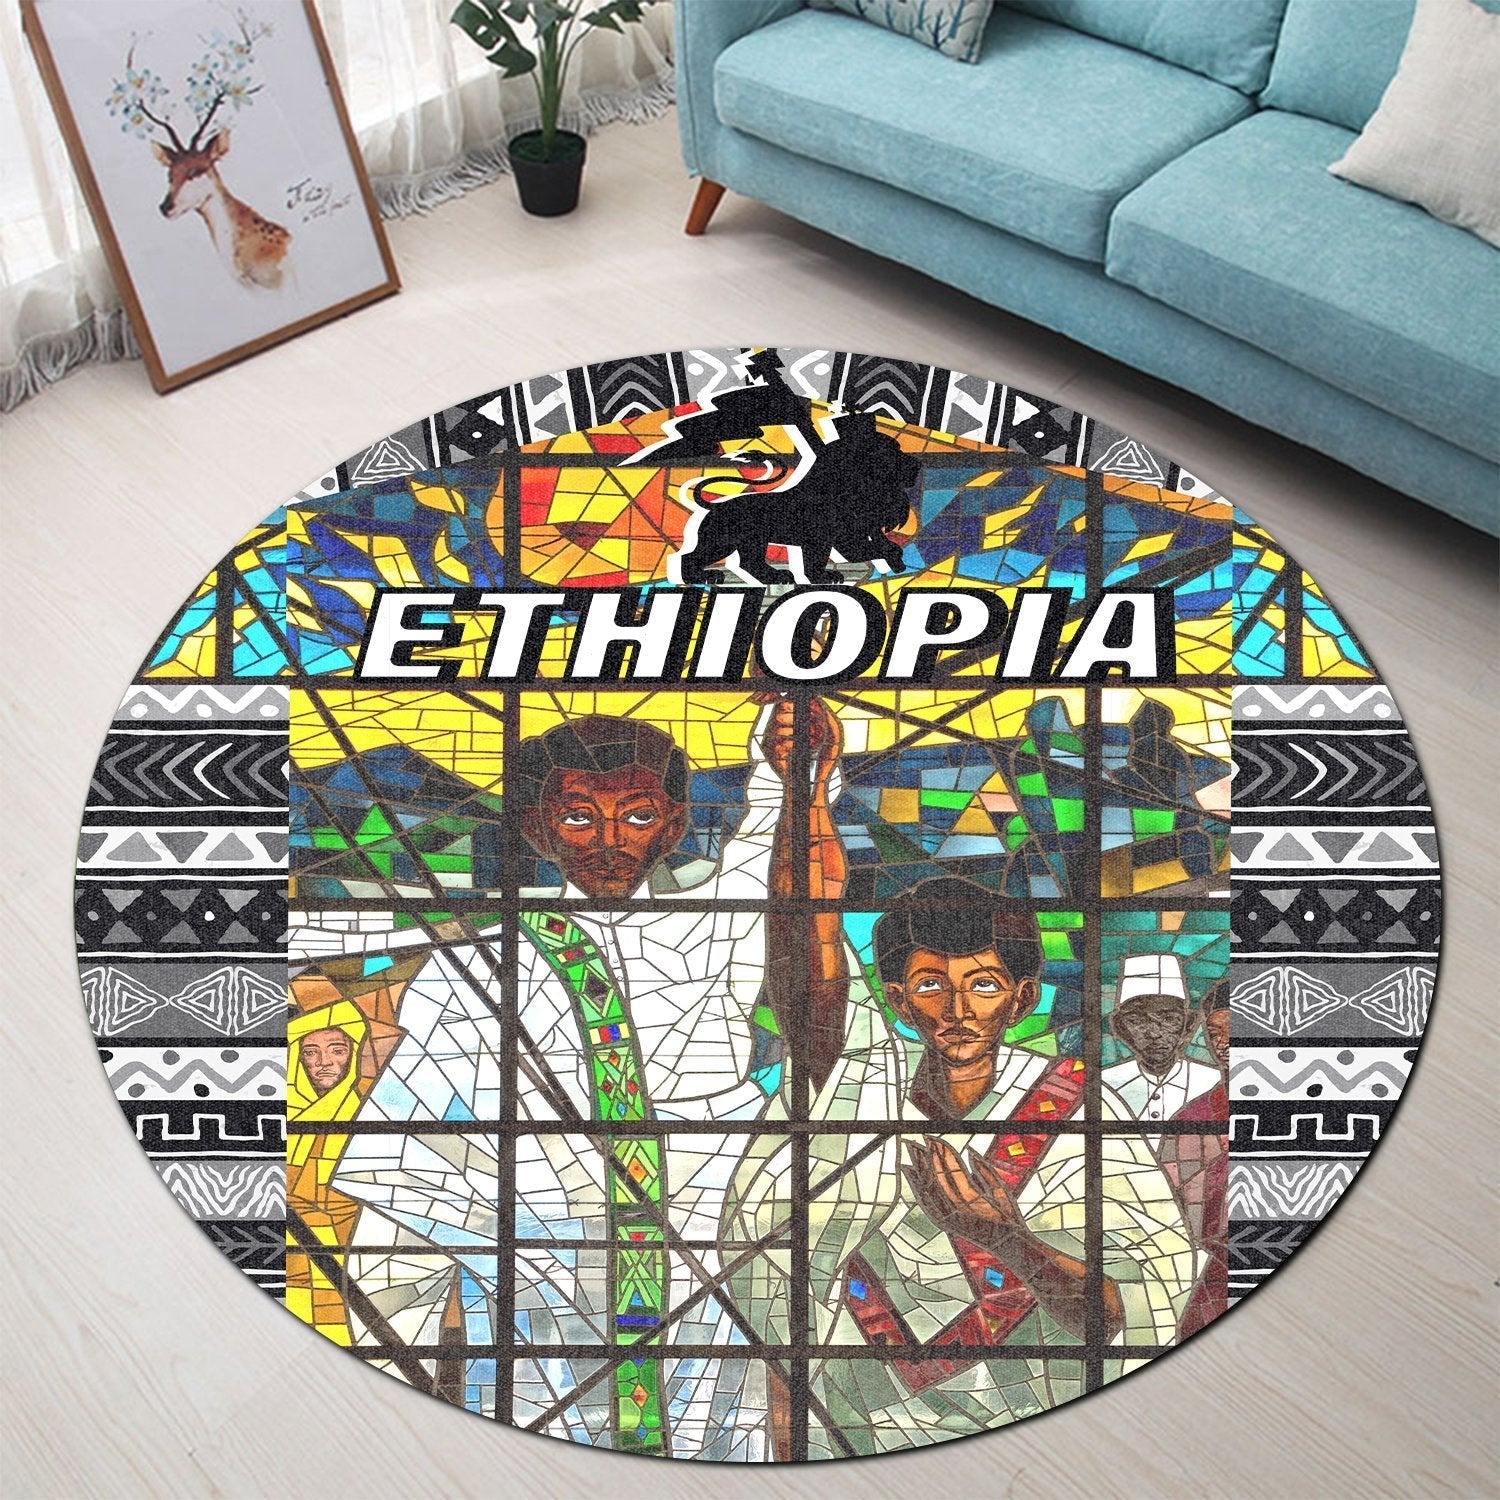 african-ethiopia-orthodox-round-carpet-the-total-liberation-of-africa